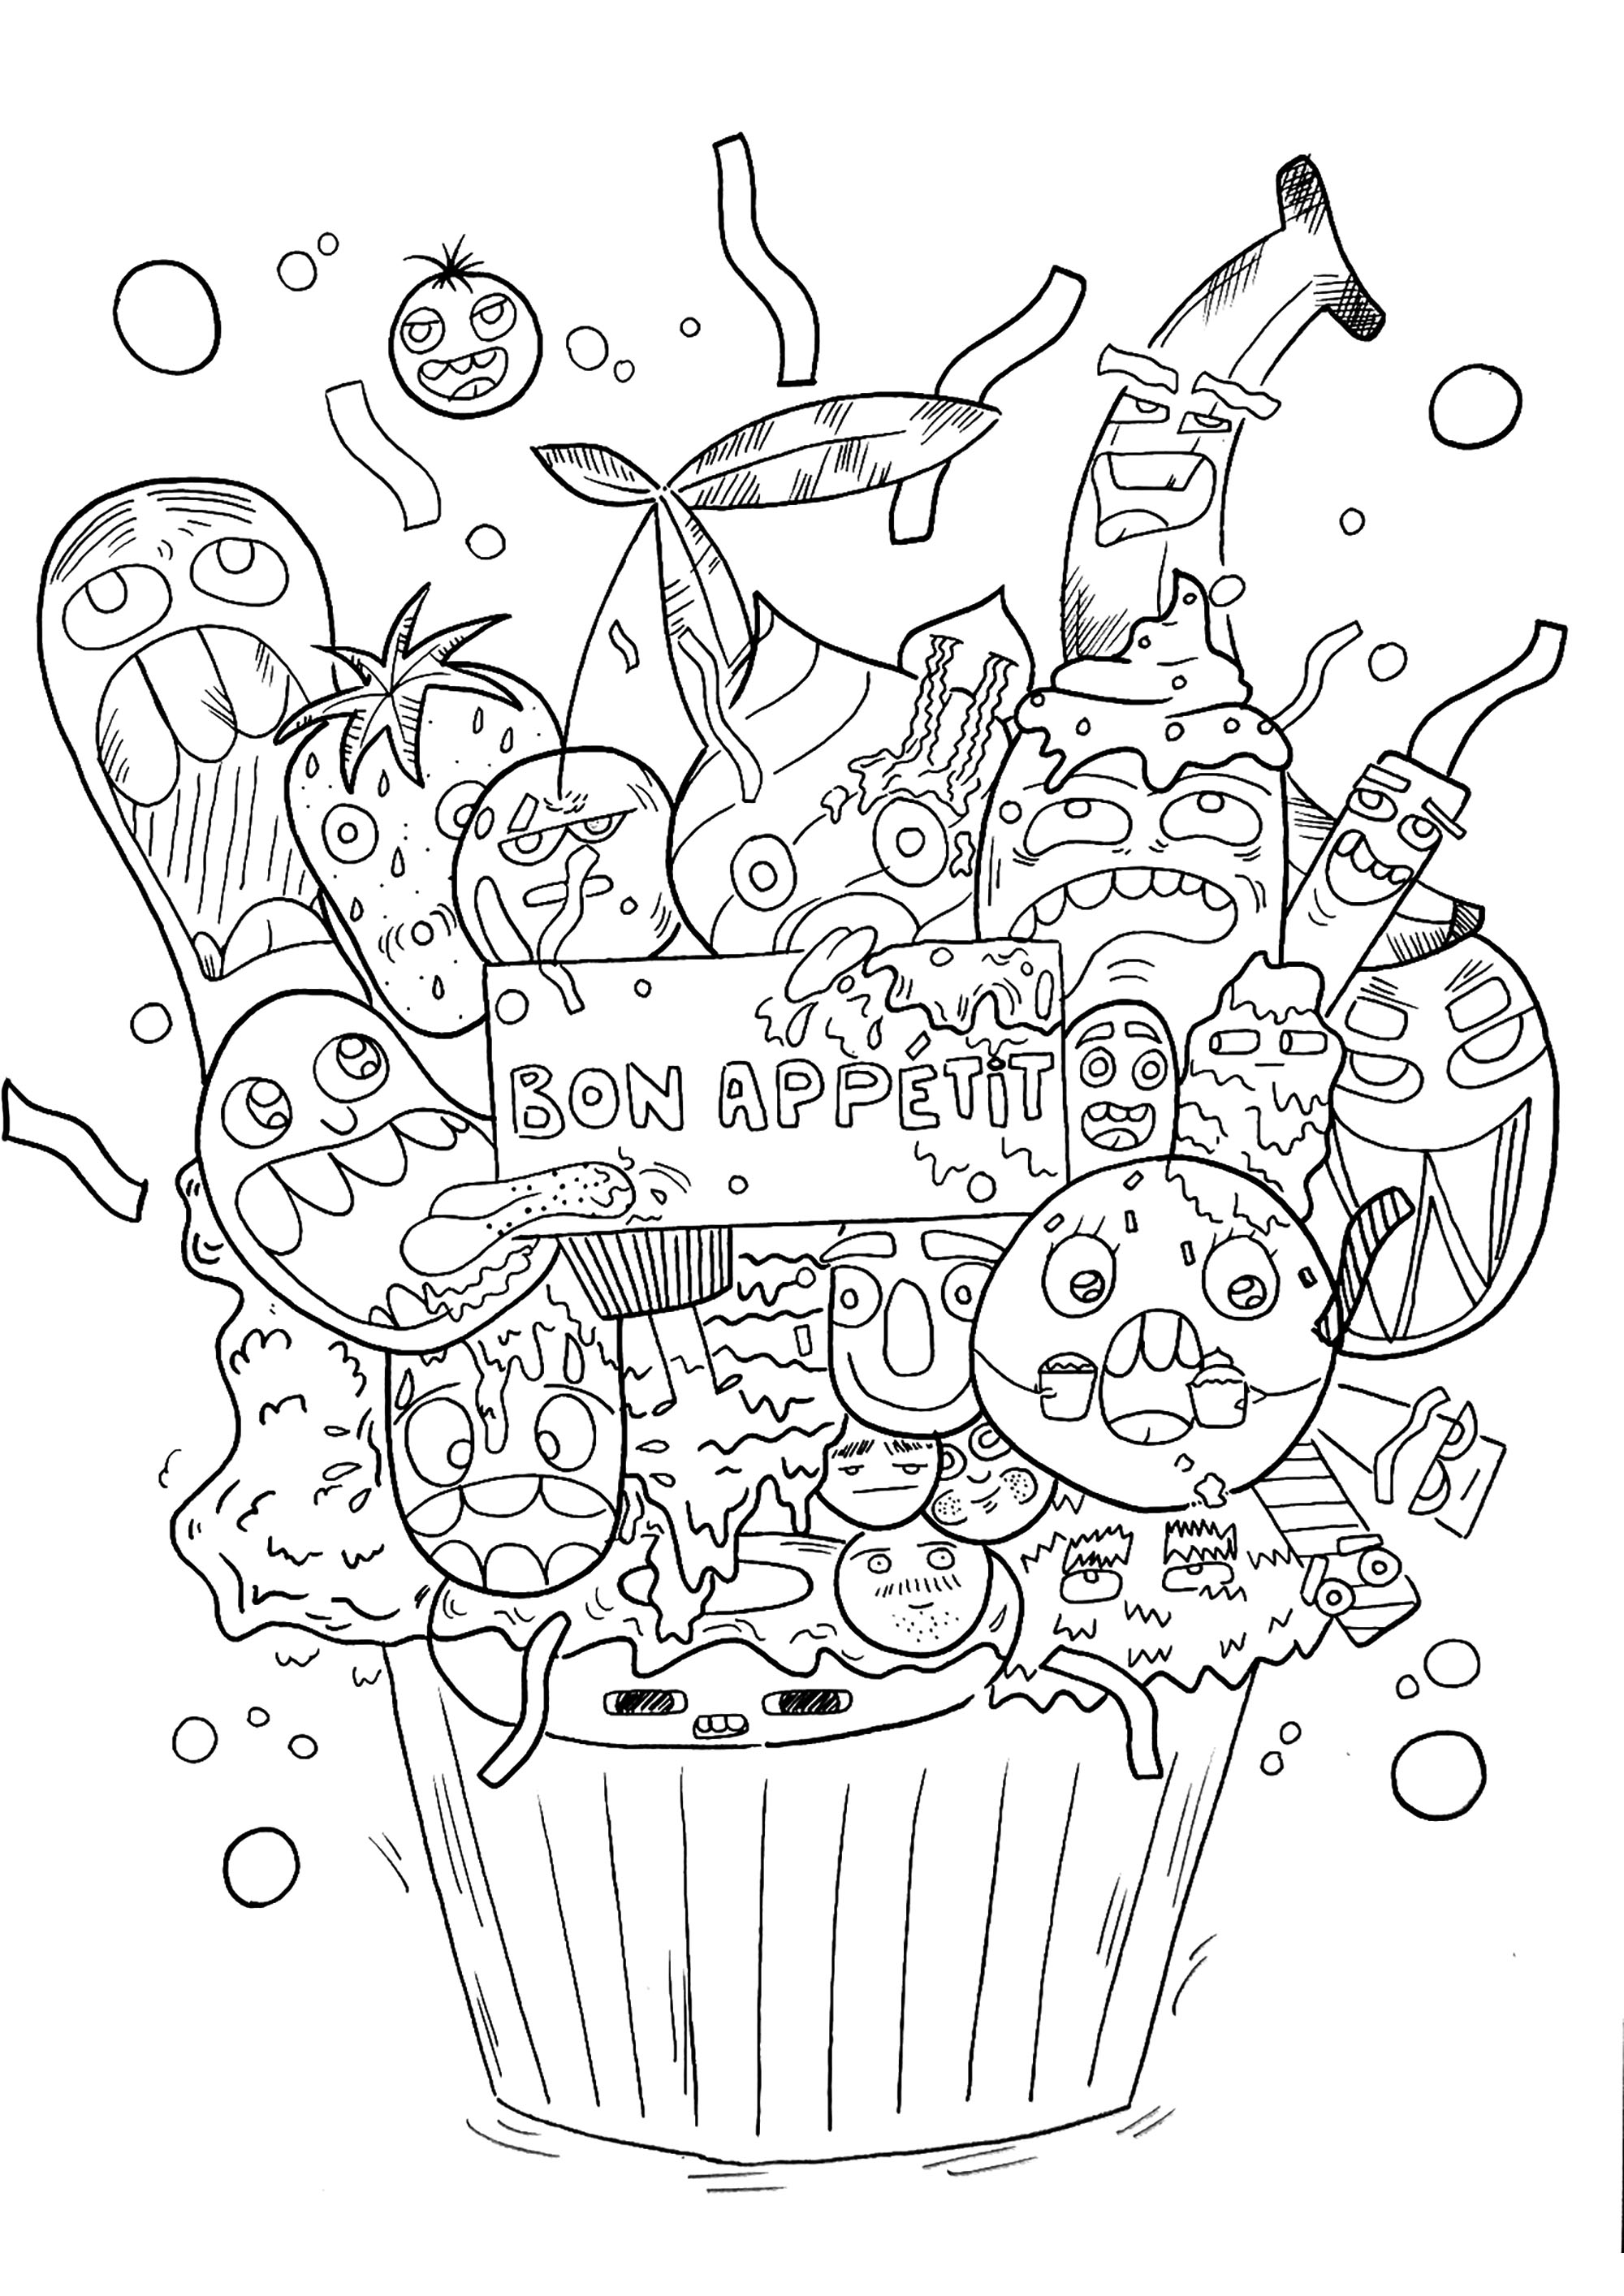 This huge cupcake with a doodle icing is going to be your favorite color dessert !